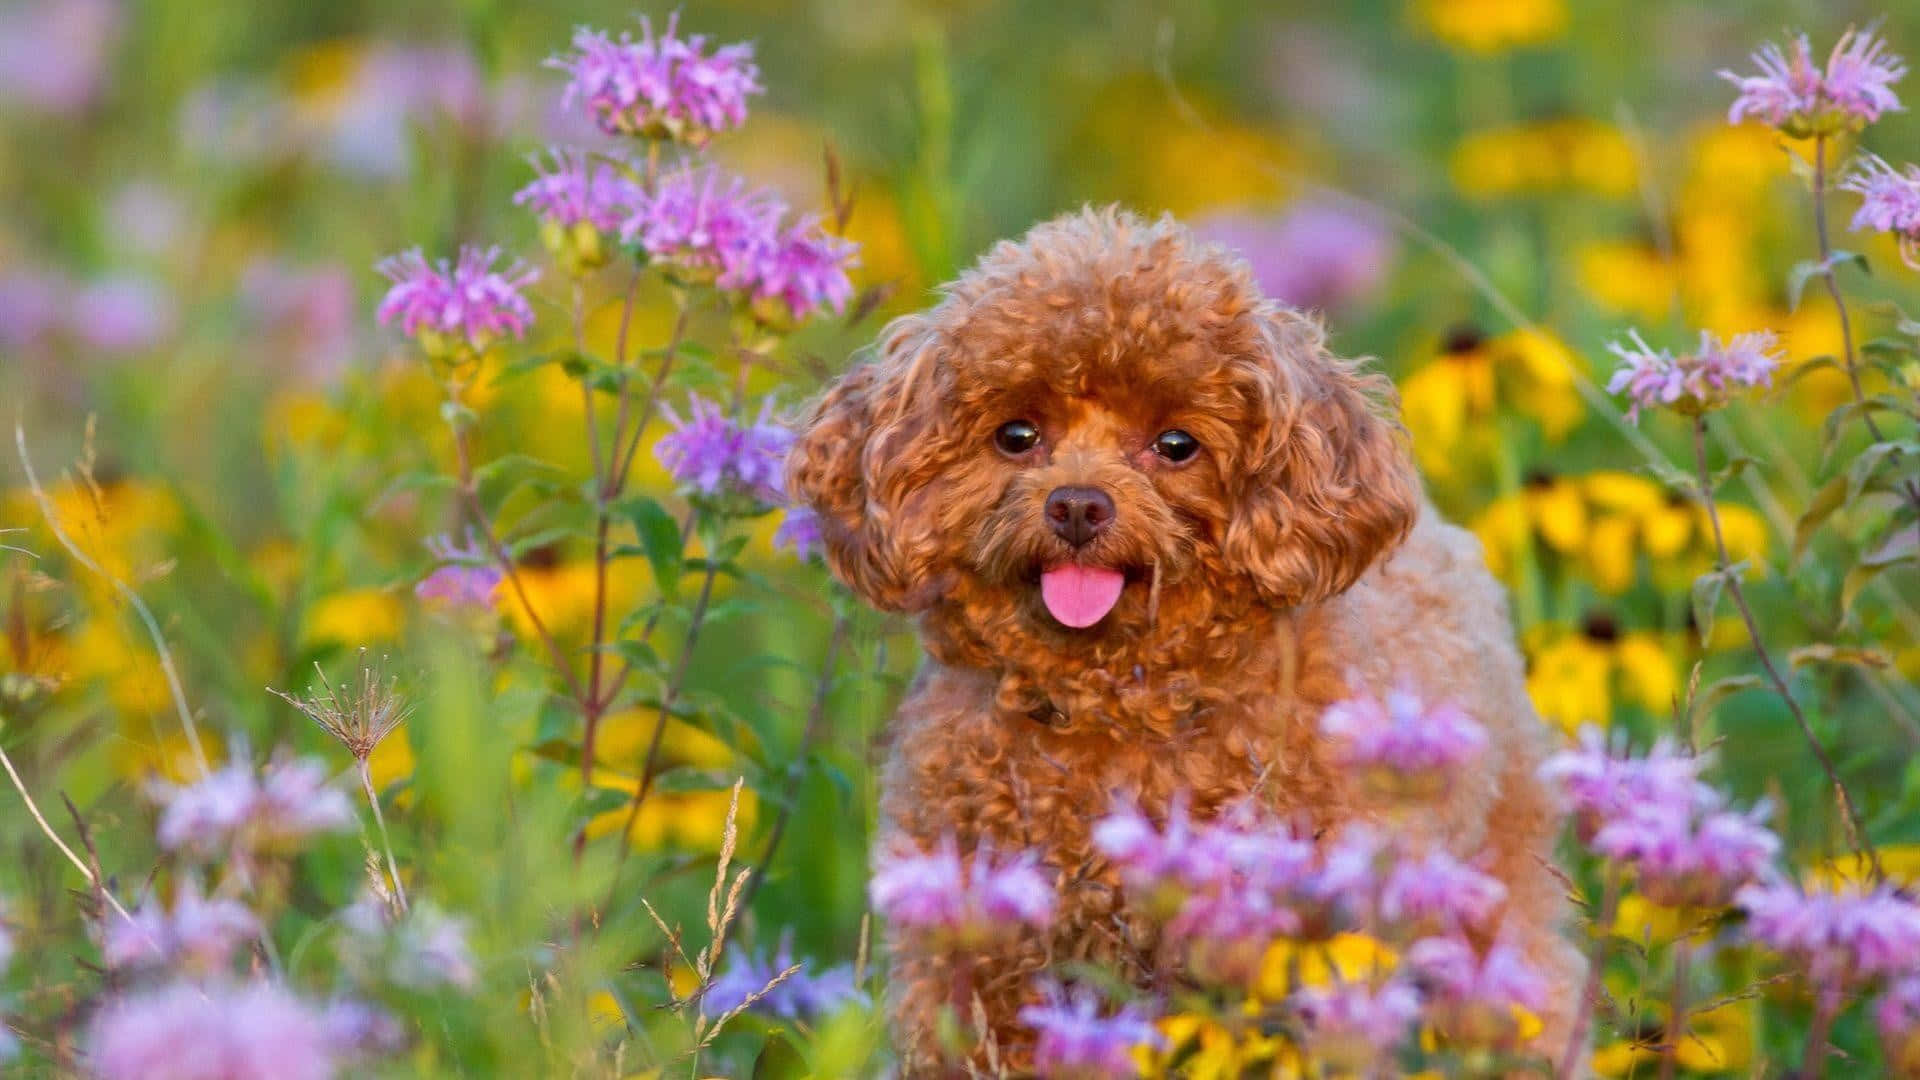 A Brown Poodle Dog Standing In A Field Of Flowers Wallpaper